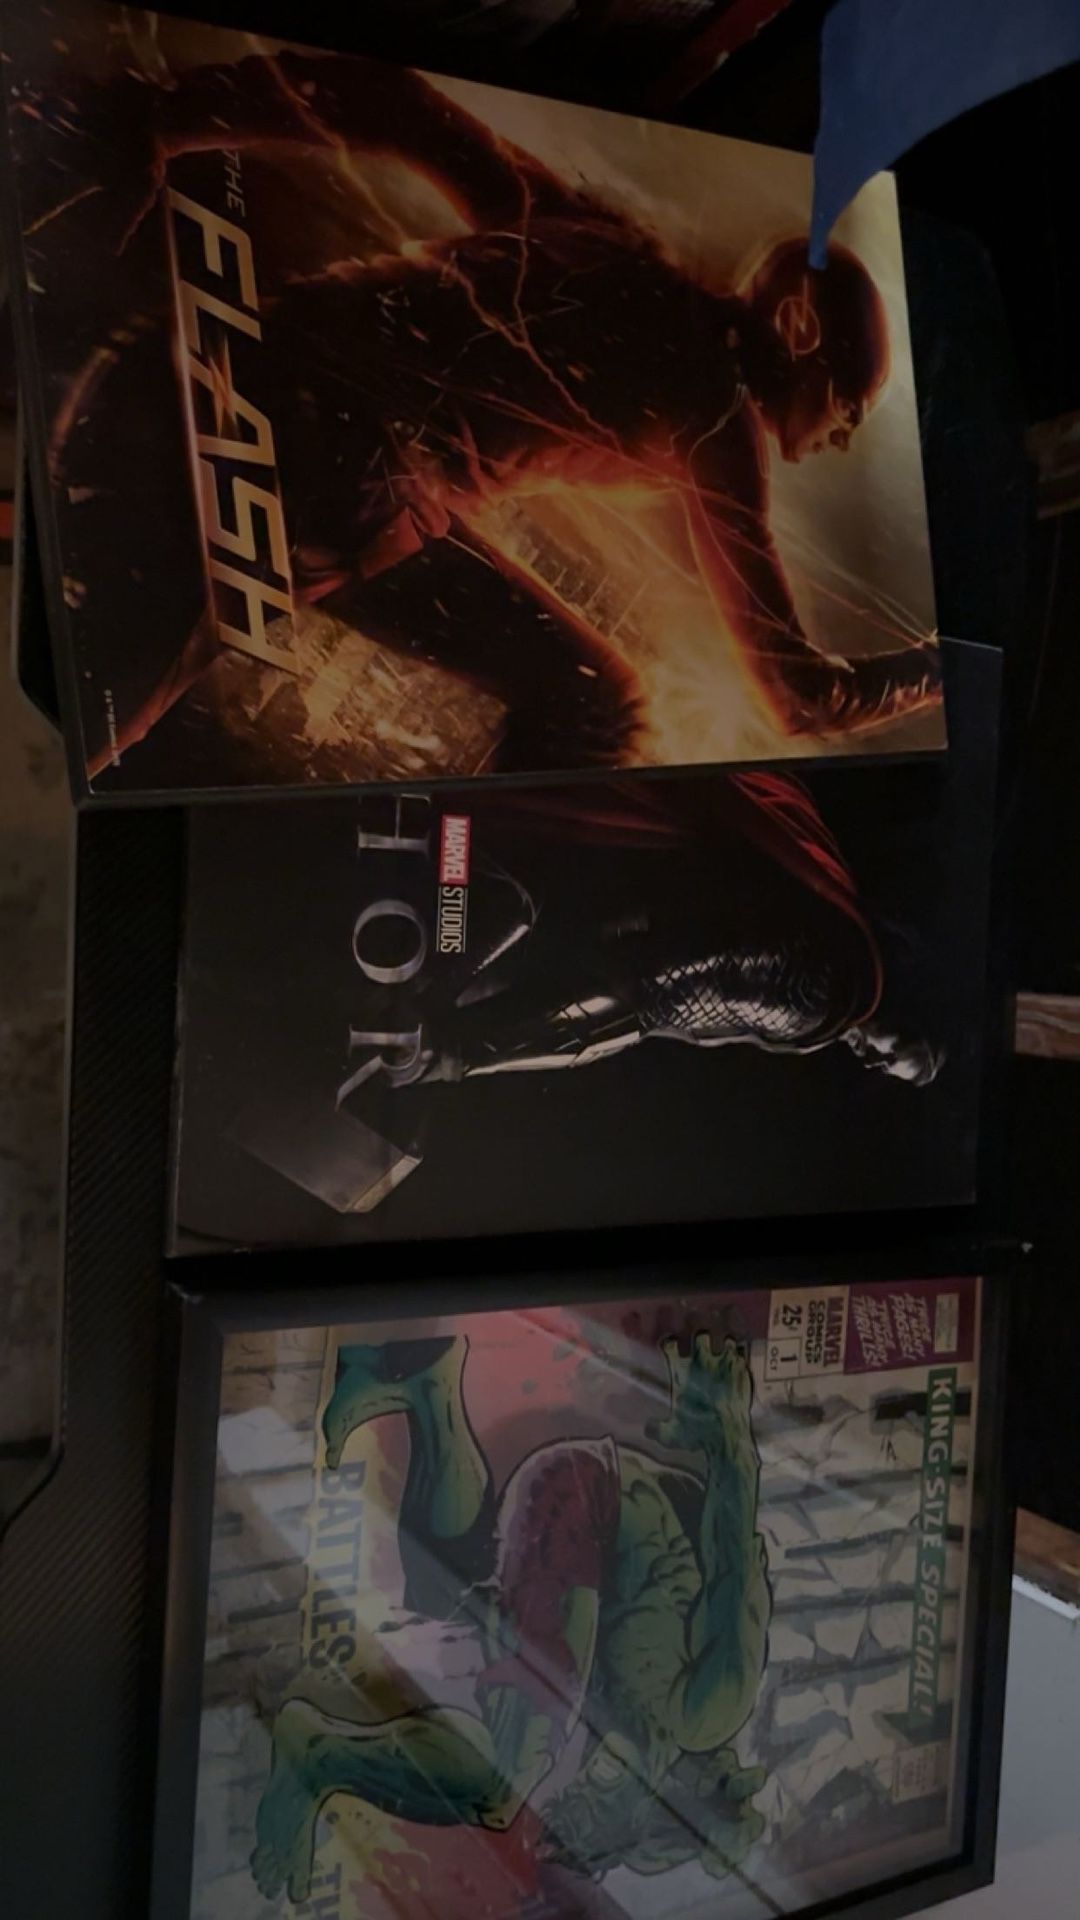 Marvel And Dc Poster New 30 Each I Taka Apple Pay To Or Cash